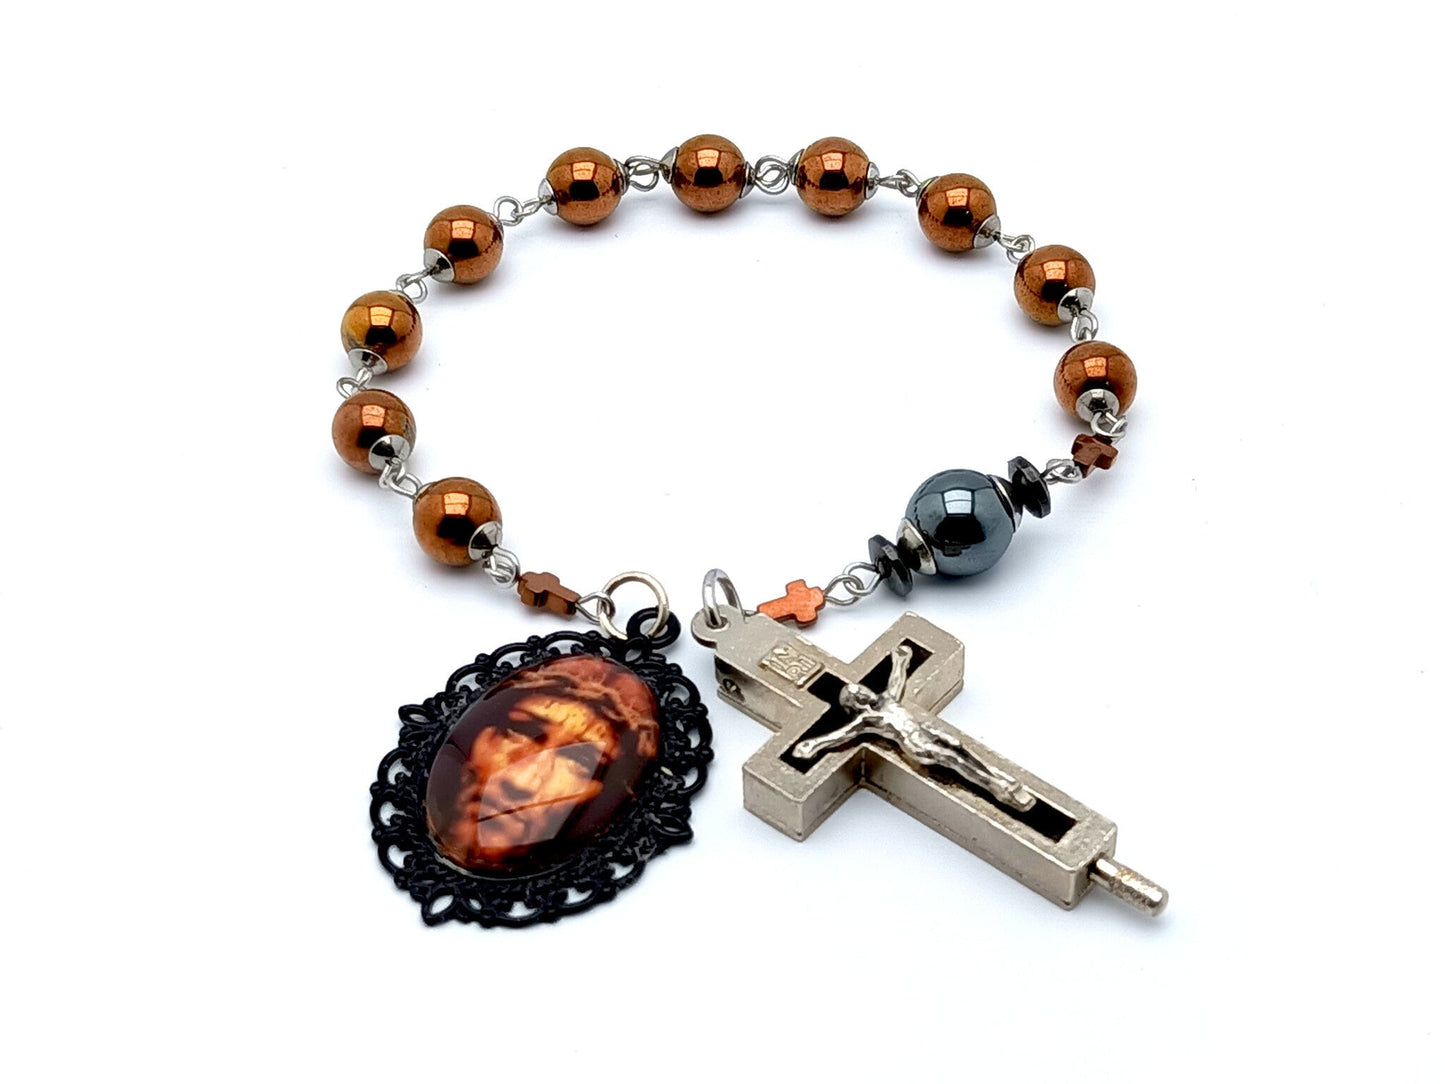 Holy Face of Jesus unique rosary beads single decade tenner rosary with copper hematite gemstone beads, relic holder crucifix and Holy face centre medal.